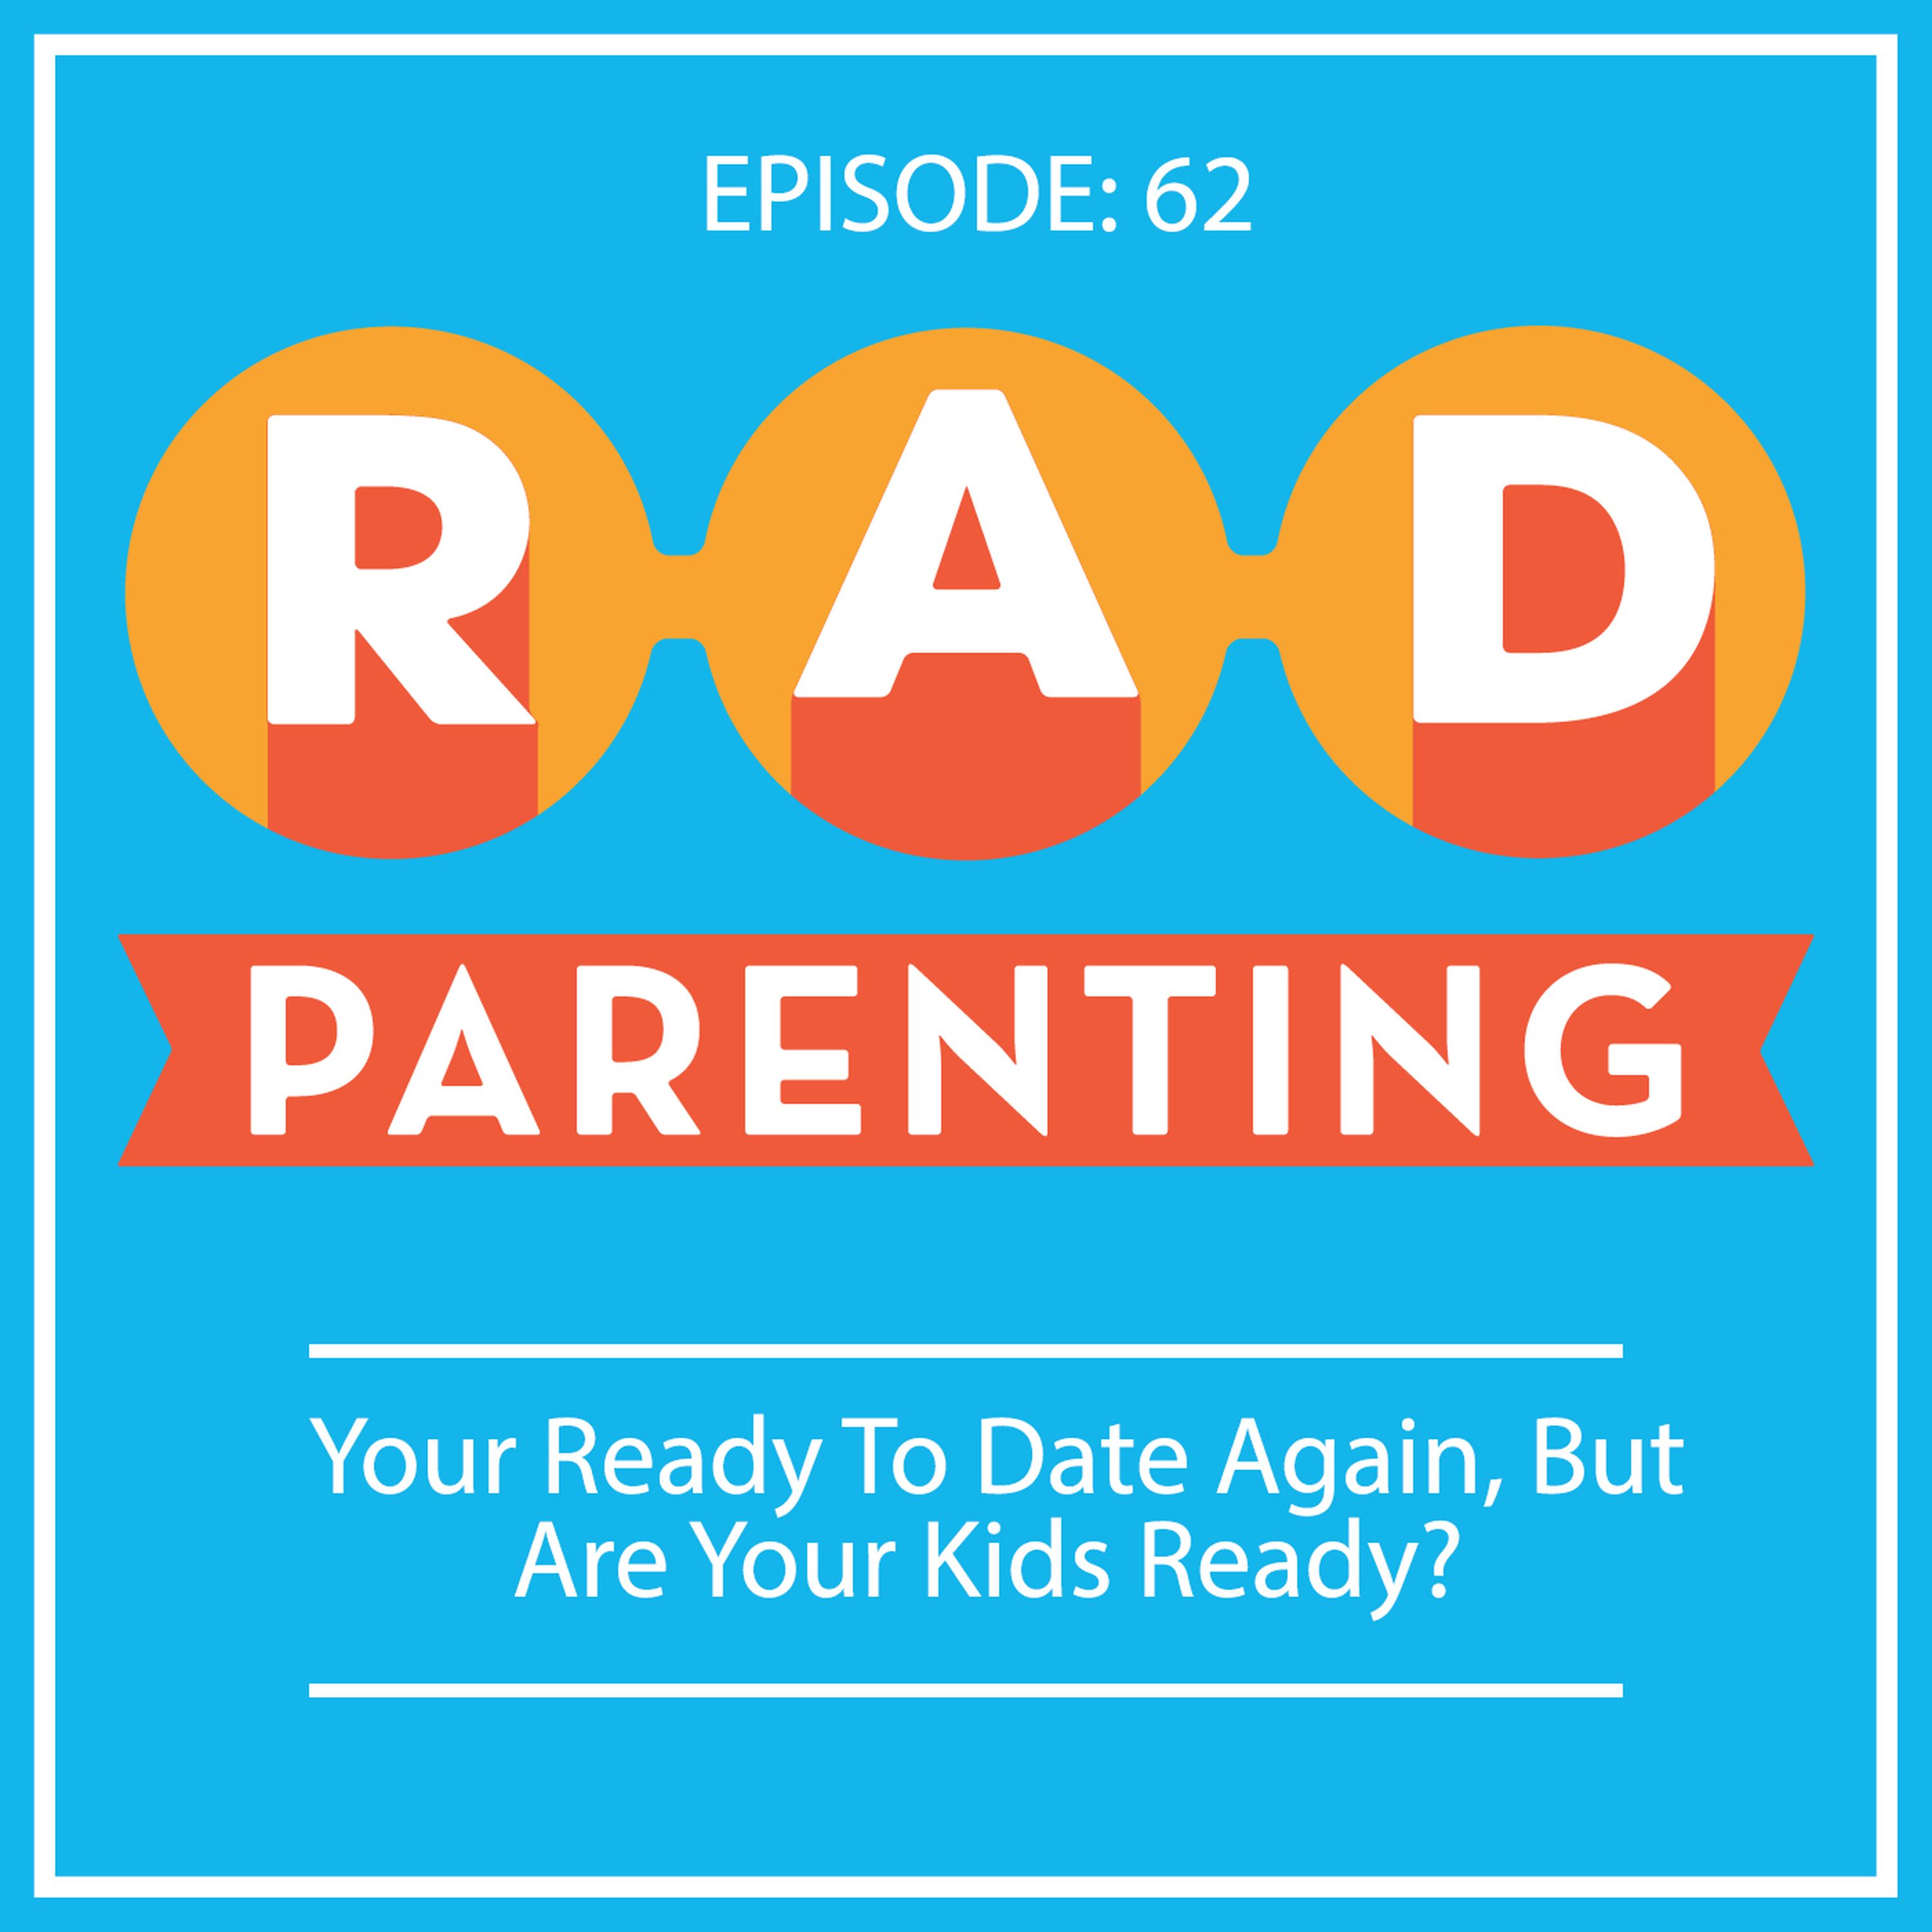 You’re Ready To Date Again, But Are Your Kids Ready?